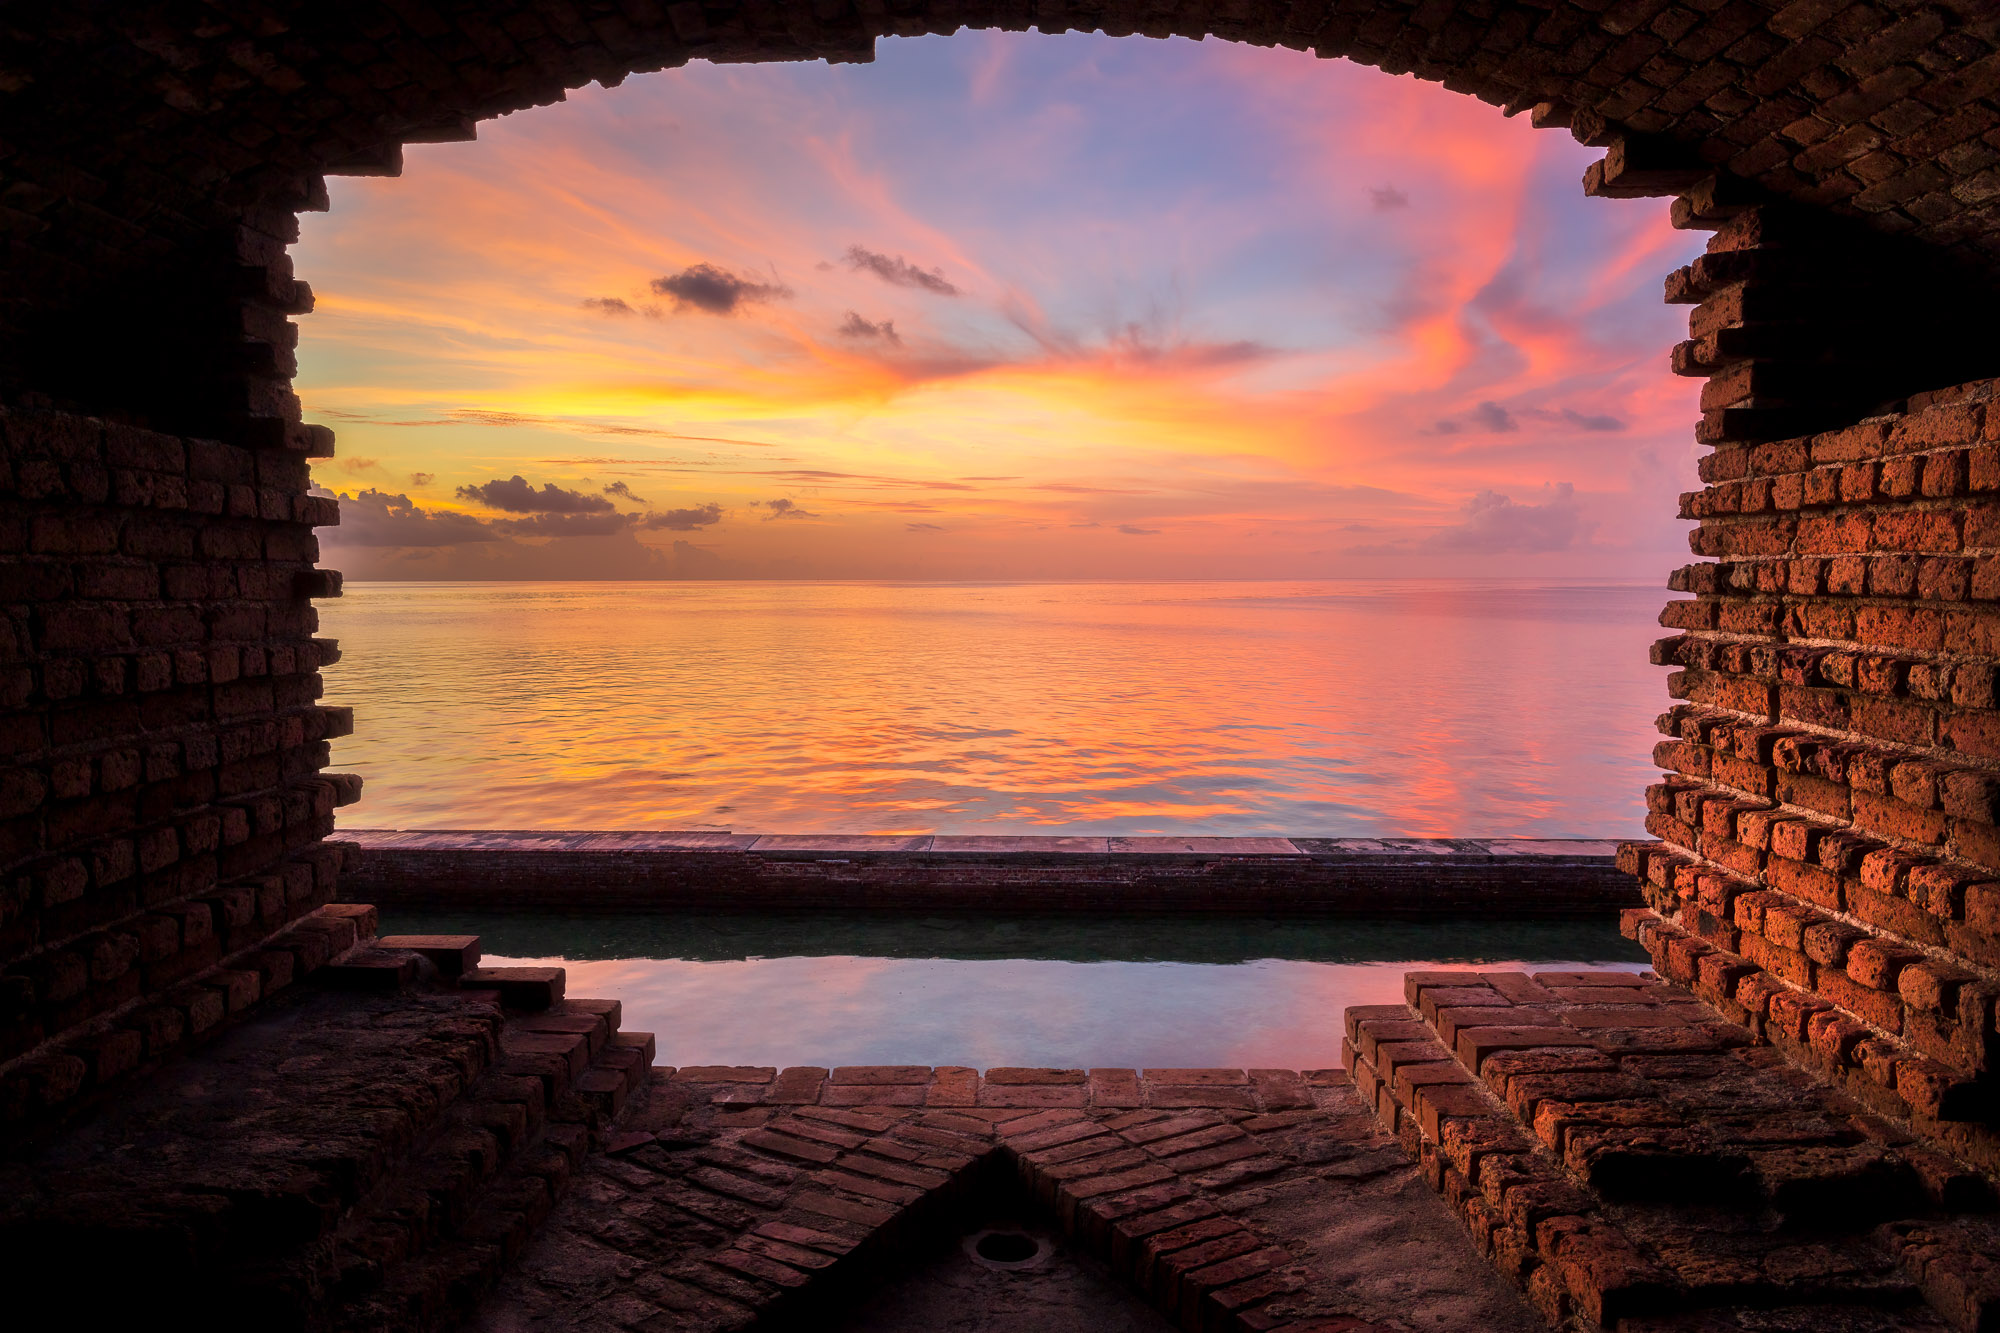 The Dry Tortugas are as beautiful as they are remote. When I watched this sunset from the massive walls of Fort Jefferson, I...